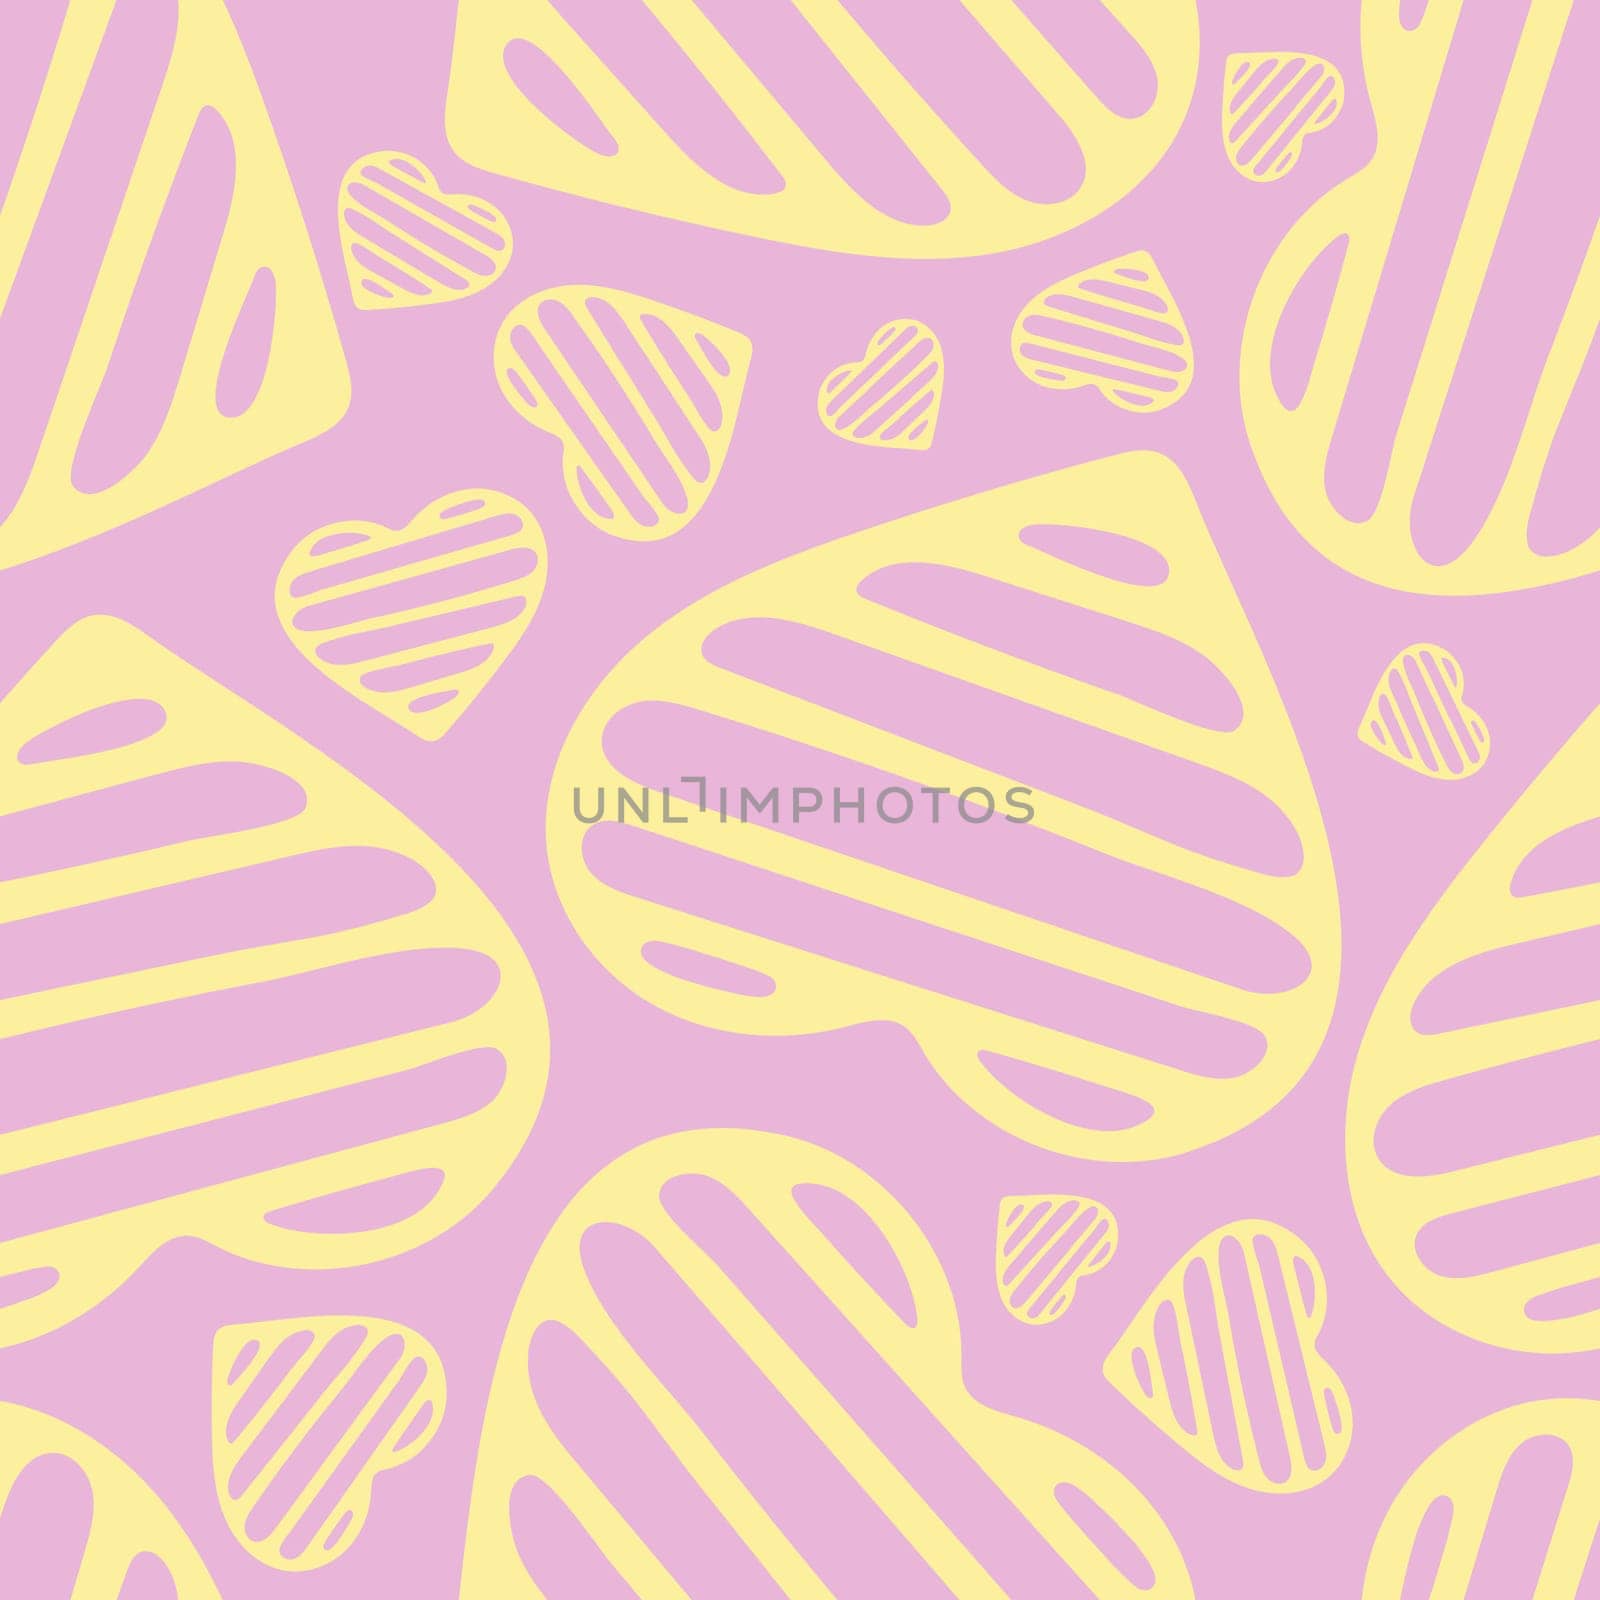 Hand Drawn Seamless Patterns with Hearts in Doodle Style. by Rina_Dozornaya